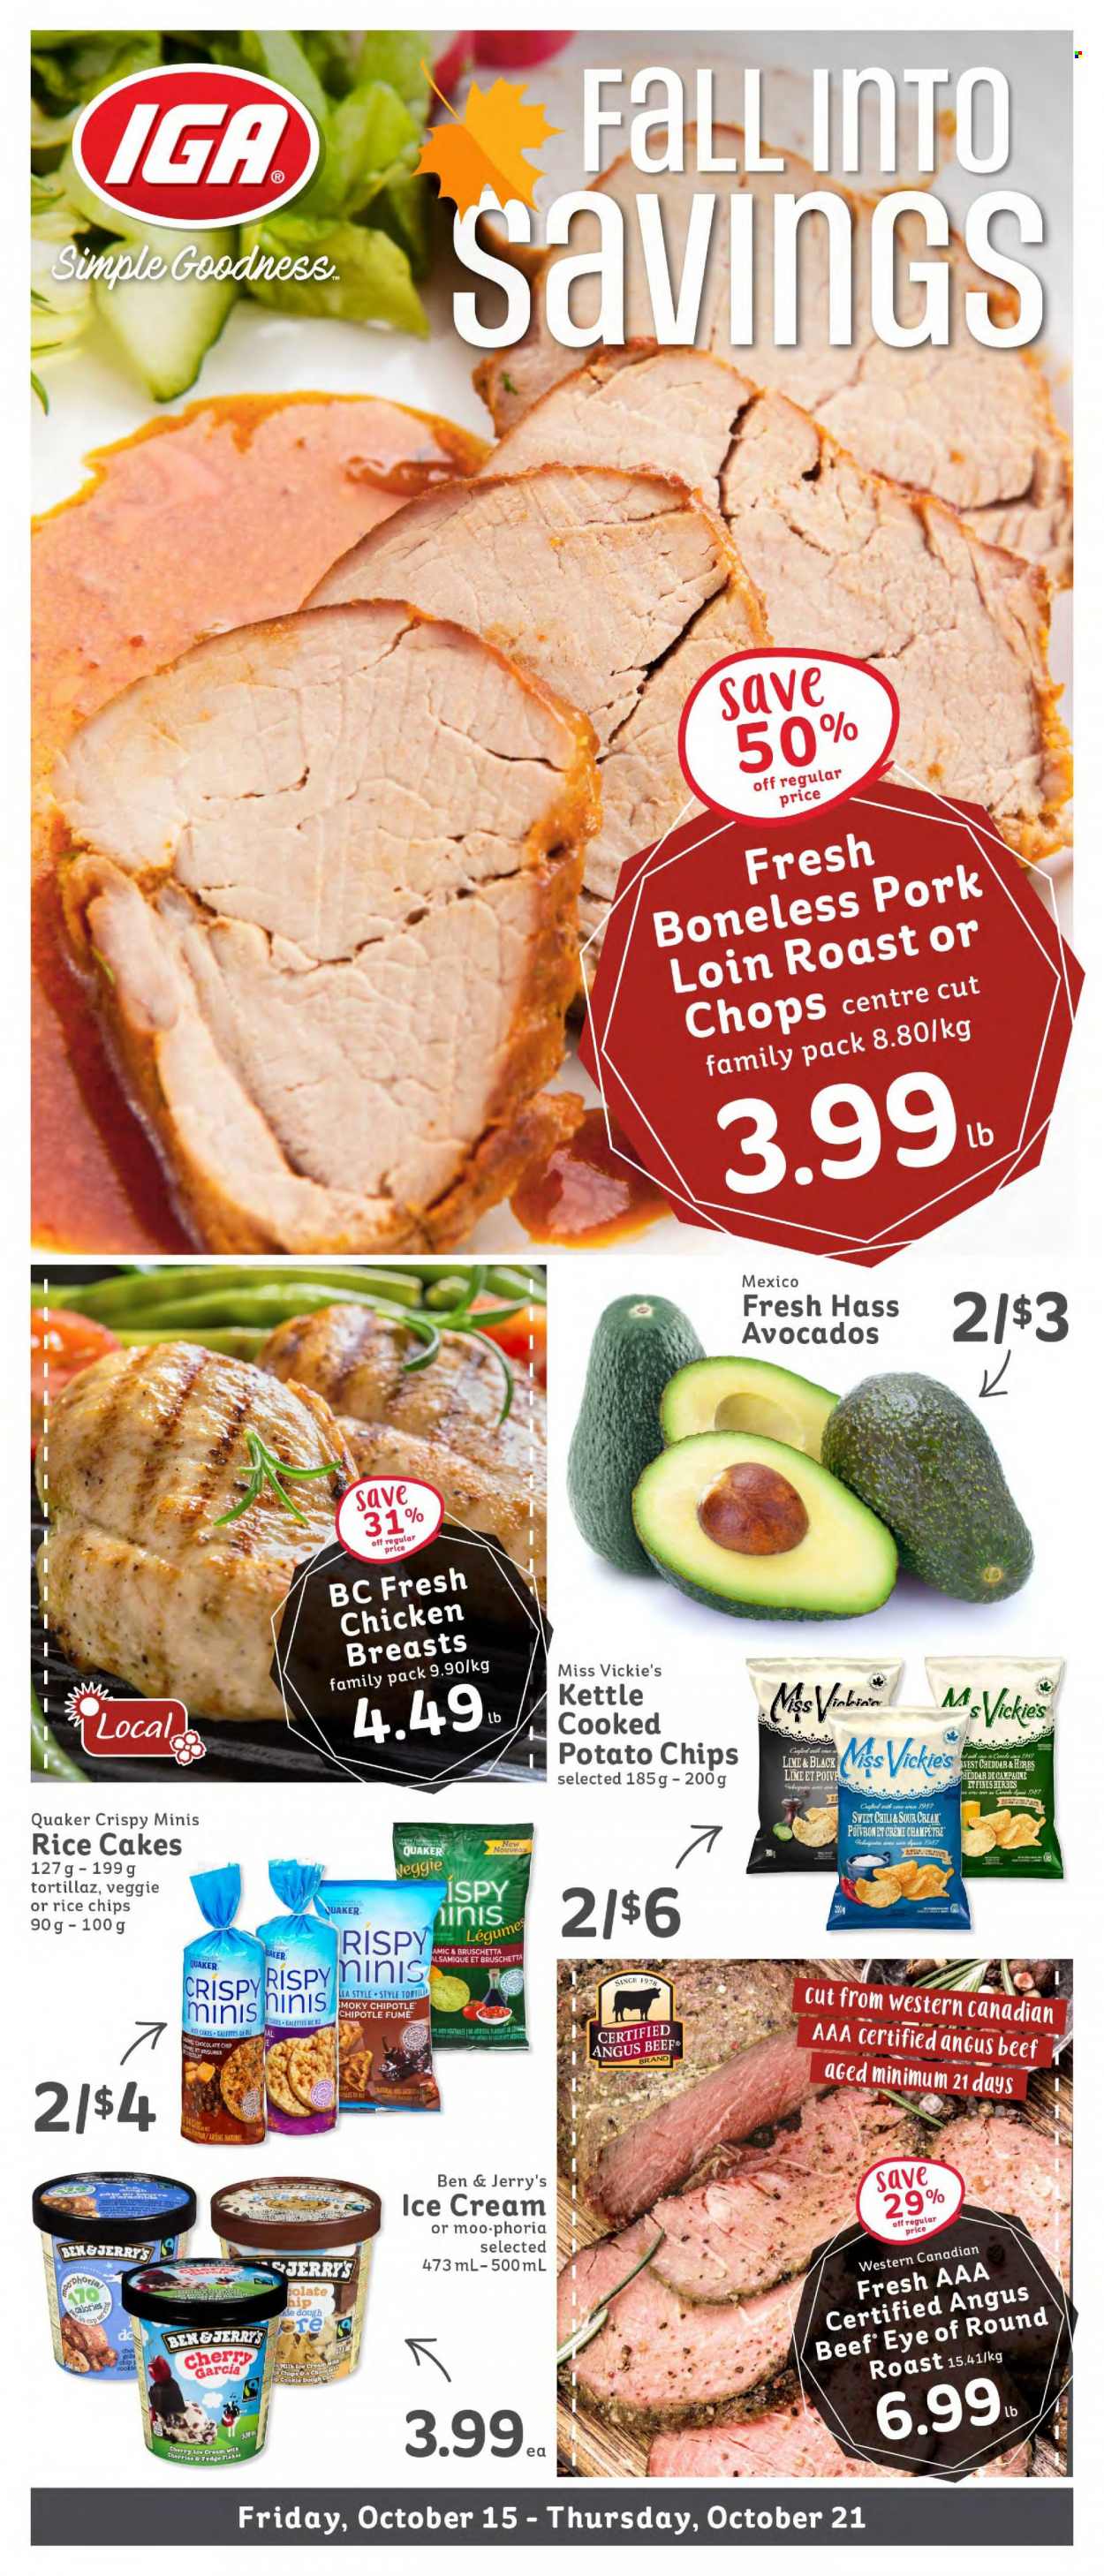 thumbnail - IGA Simple Goodness Flyer - October 15, 2021 - October 21, 2021 - Sales products - avocado, Quaker, bruschetta, cheese, ice cream, Ben & Jerry's, cookie dough, potato chips, herbs, chicken breasts, beef meat, eye of round, round roast, pork loin, pork meat, chips. Page 1.